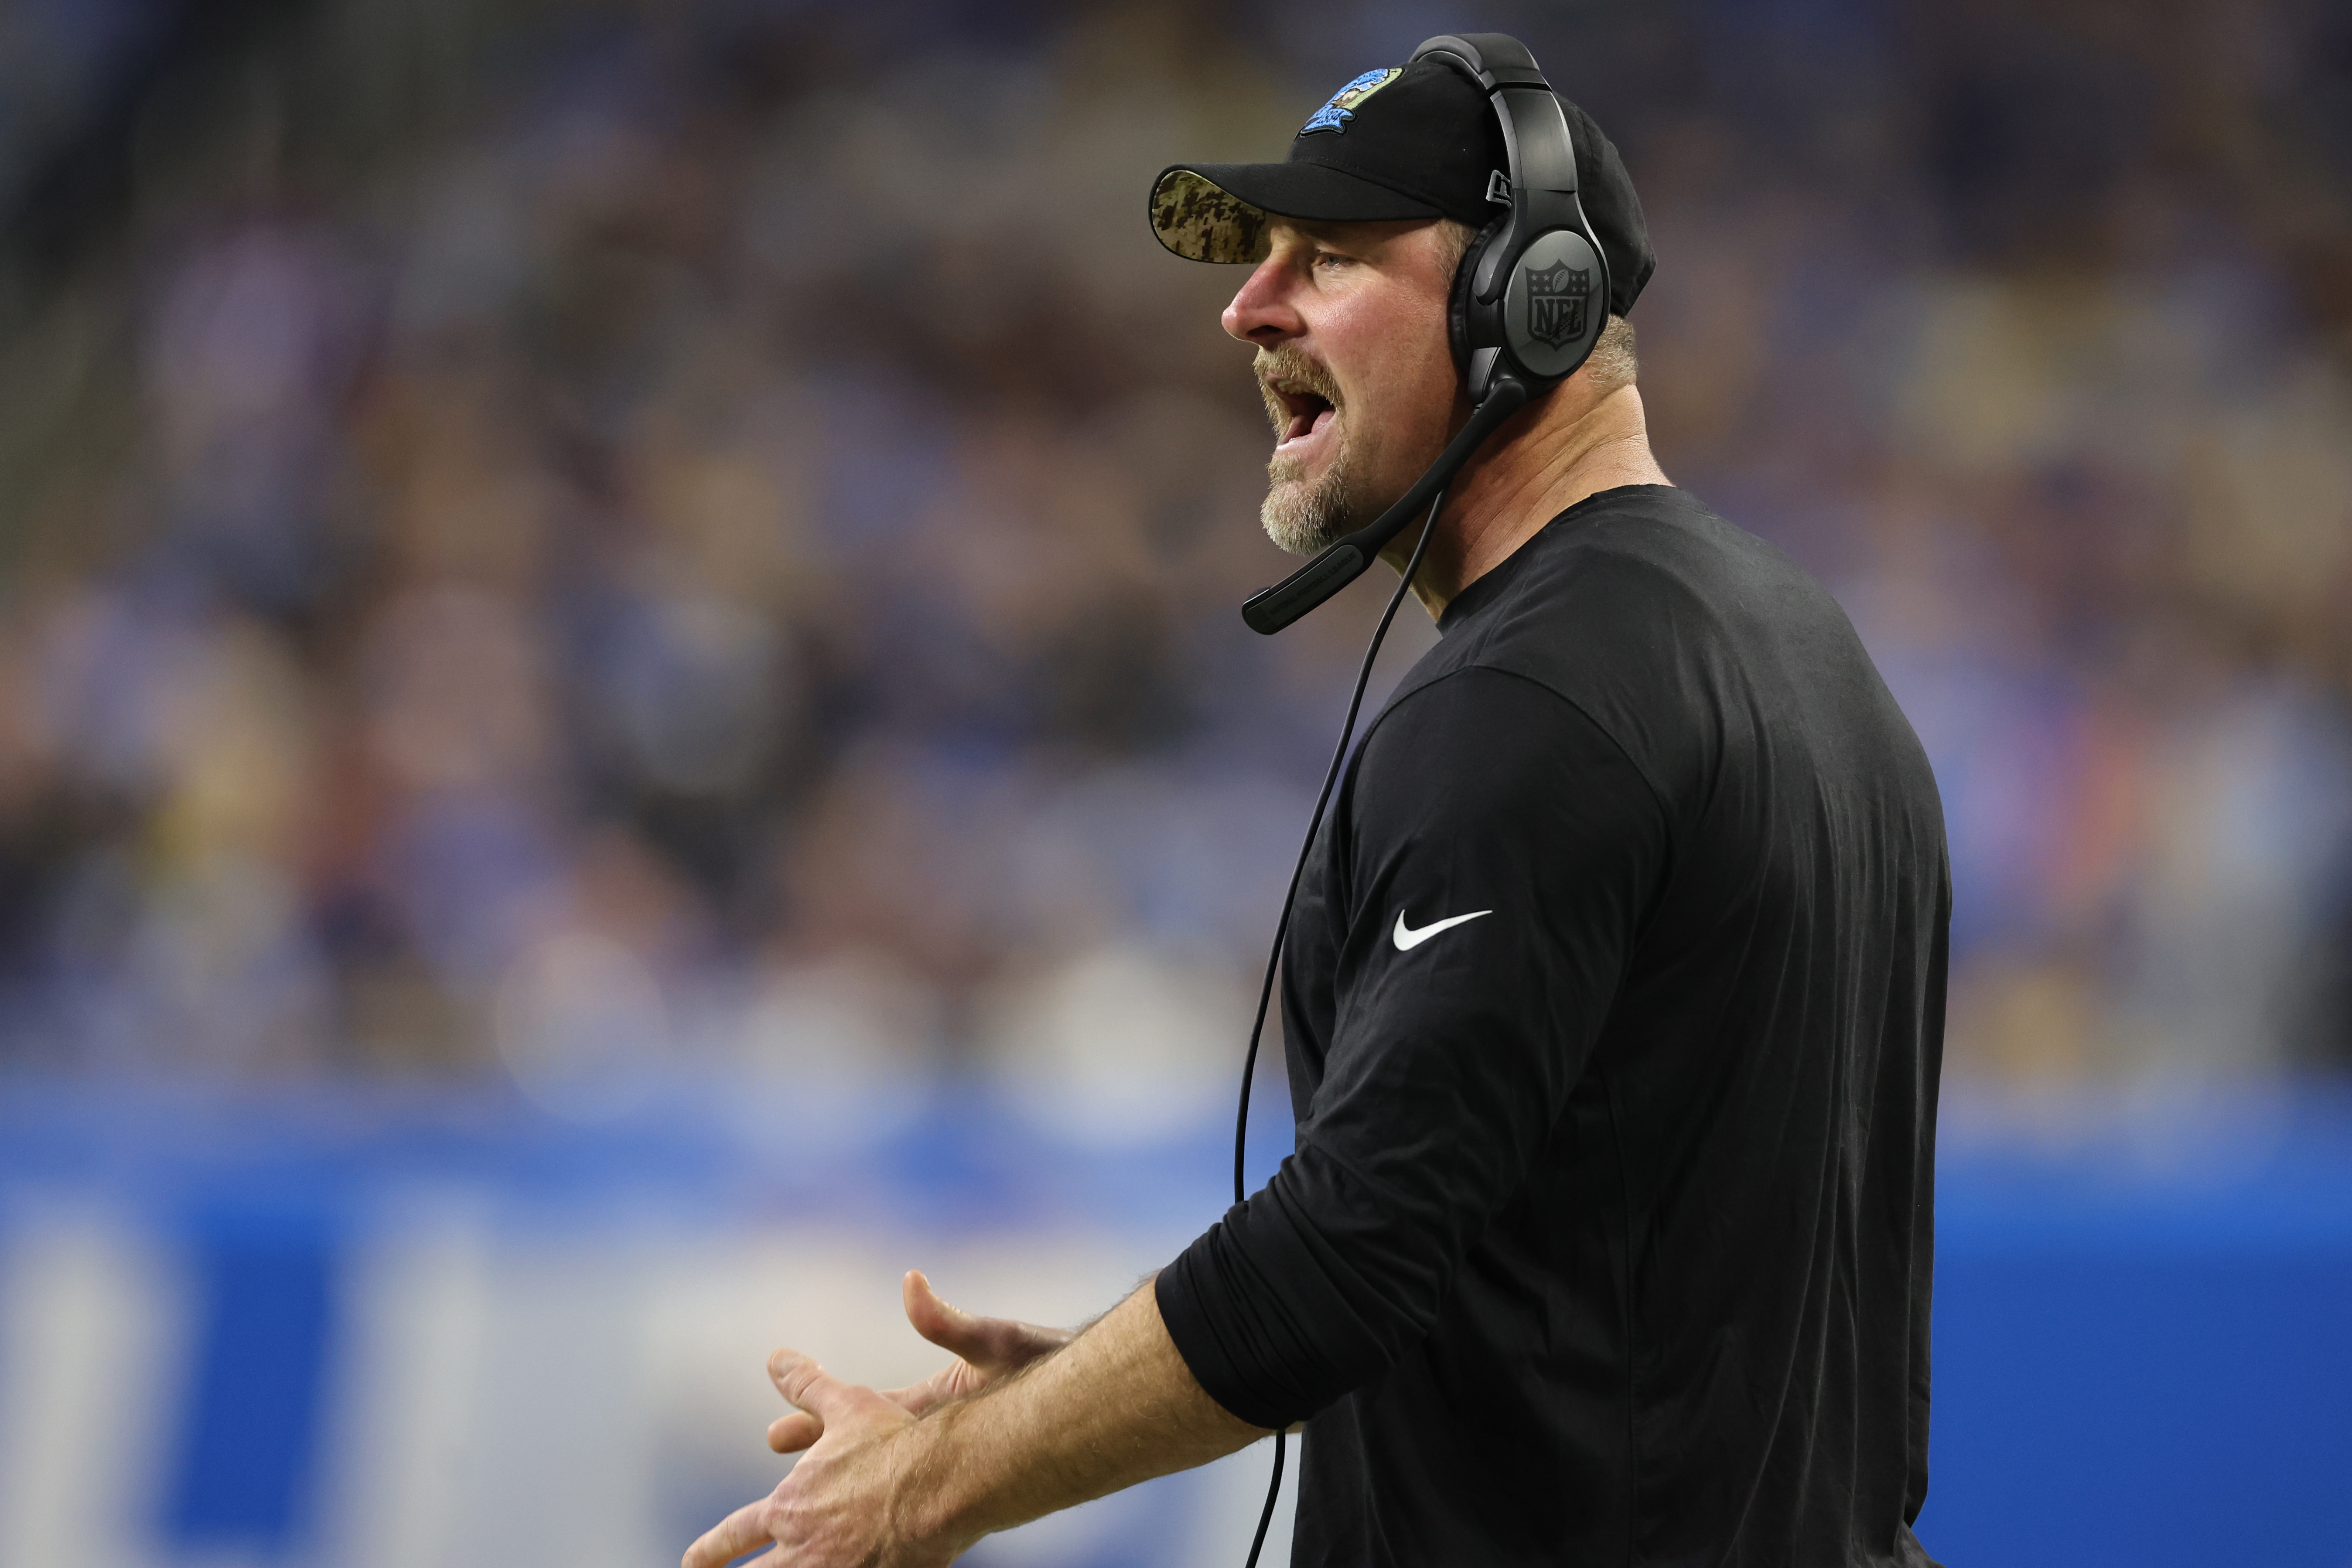 Head coach Dan Campbell of the Detroit Lions reacts during the first half of the game against the Minnesota Vikings at Ford Field on December 11, 2022 in Detroit, Michigan.